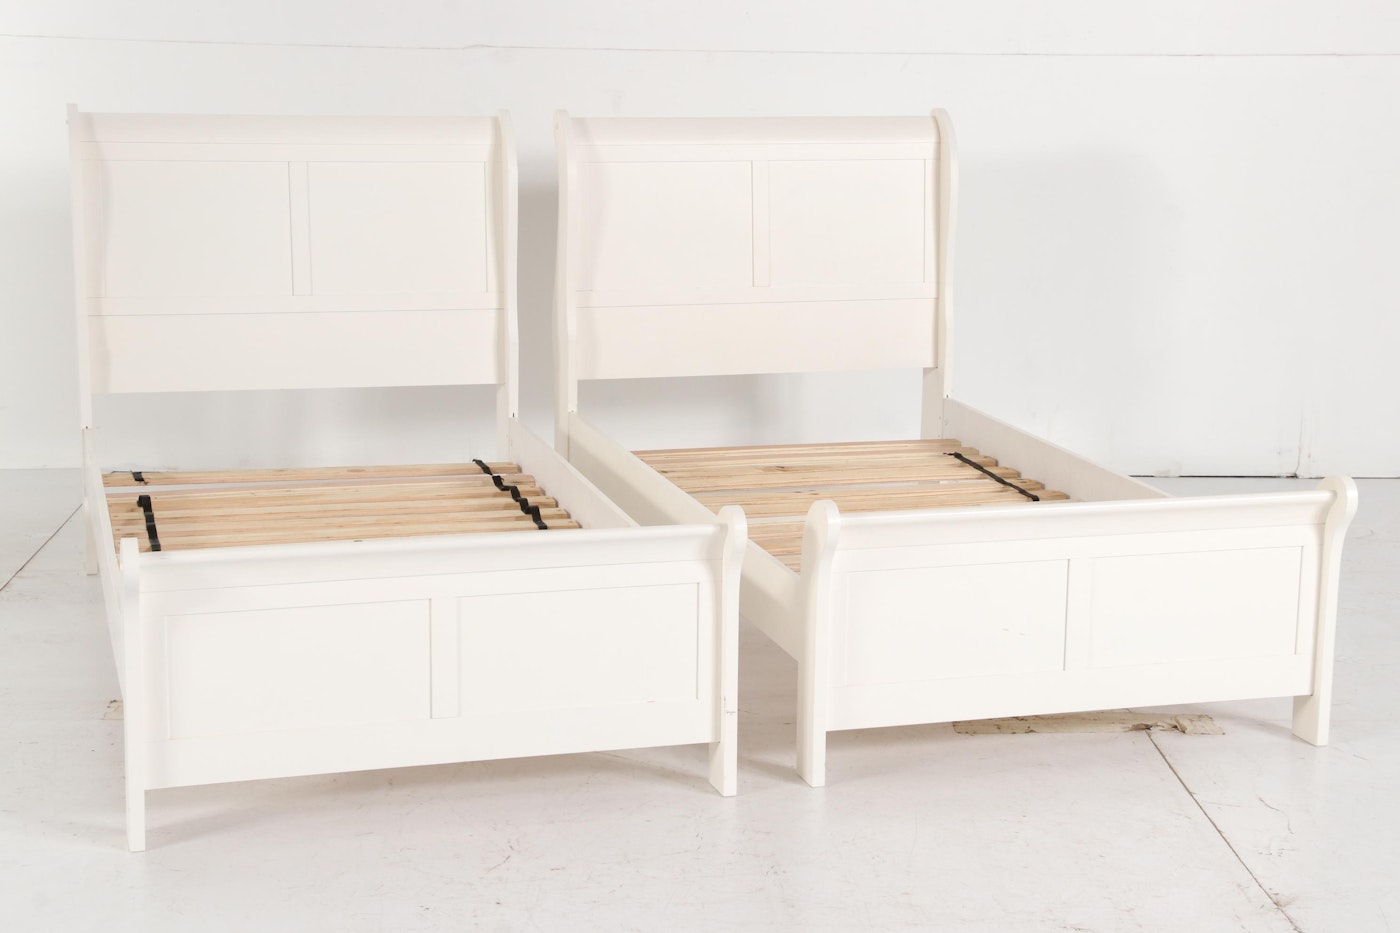 Signature Design for Ashley Furniture White-Painted Twin Sized Bed